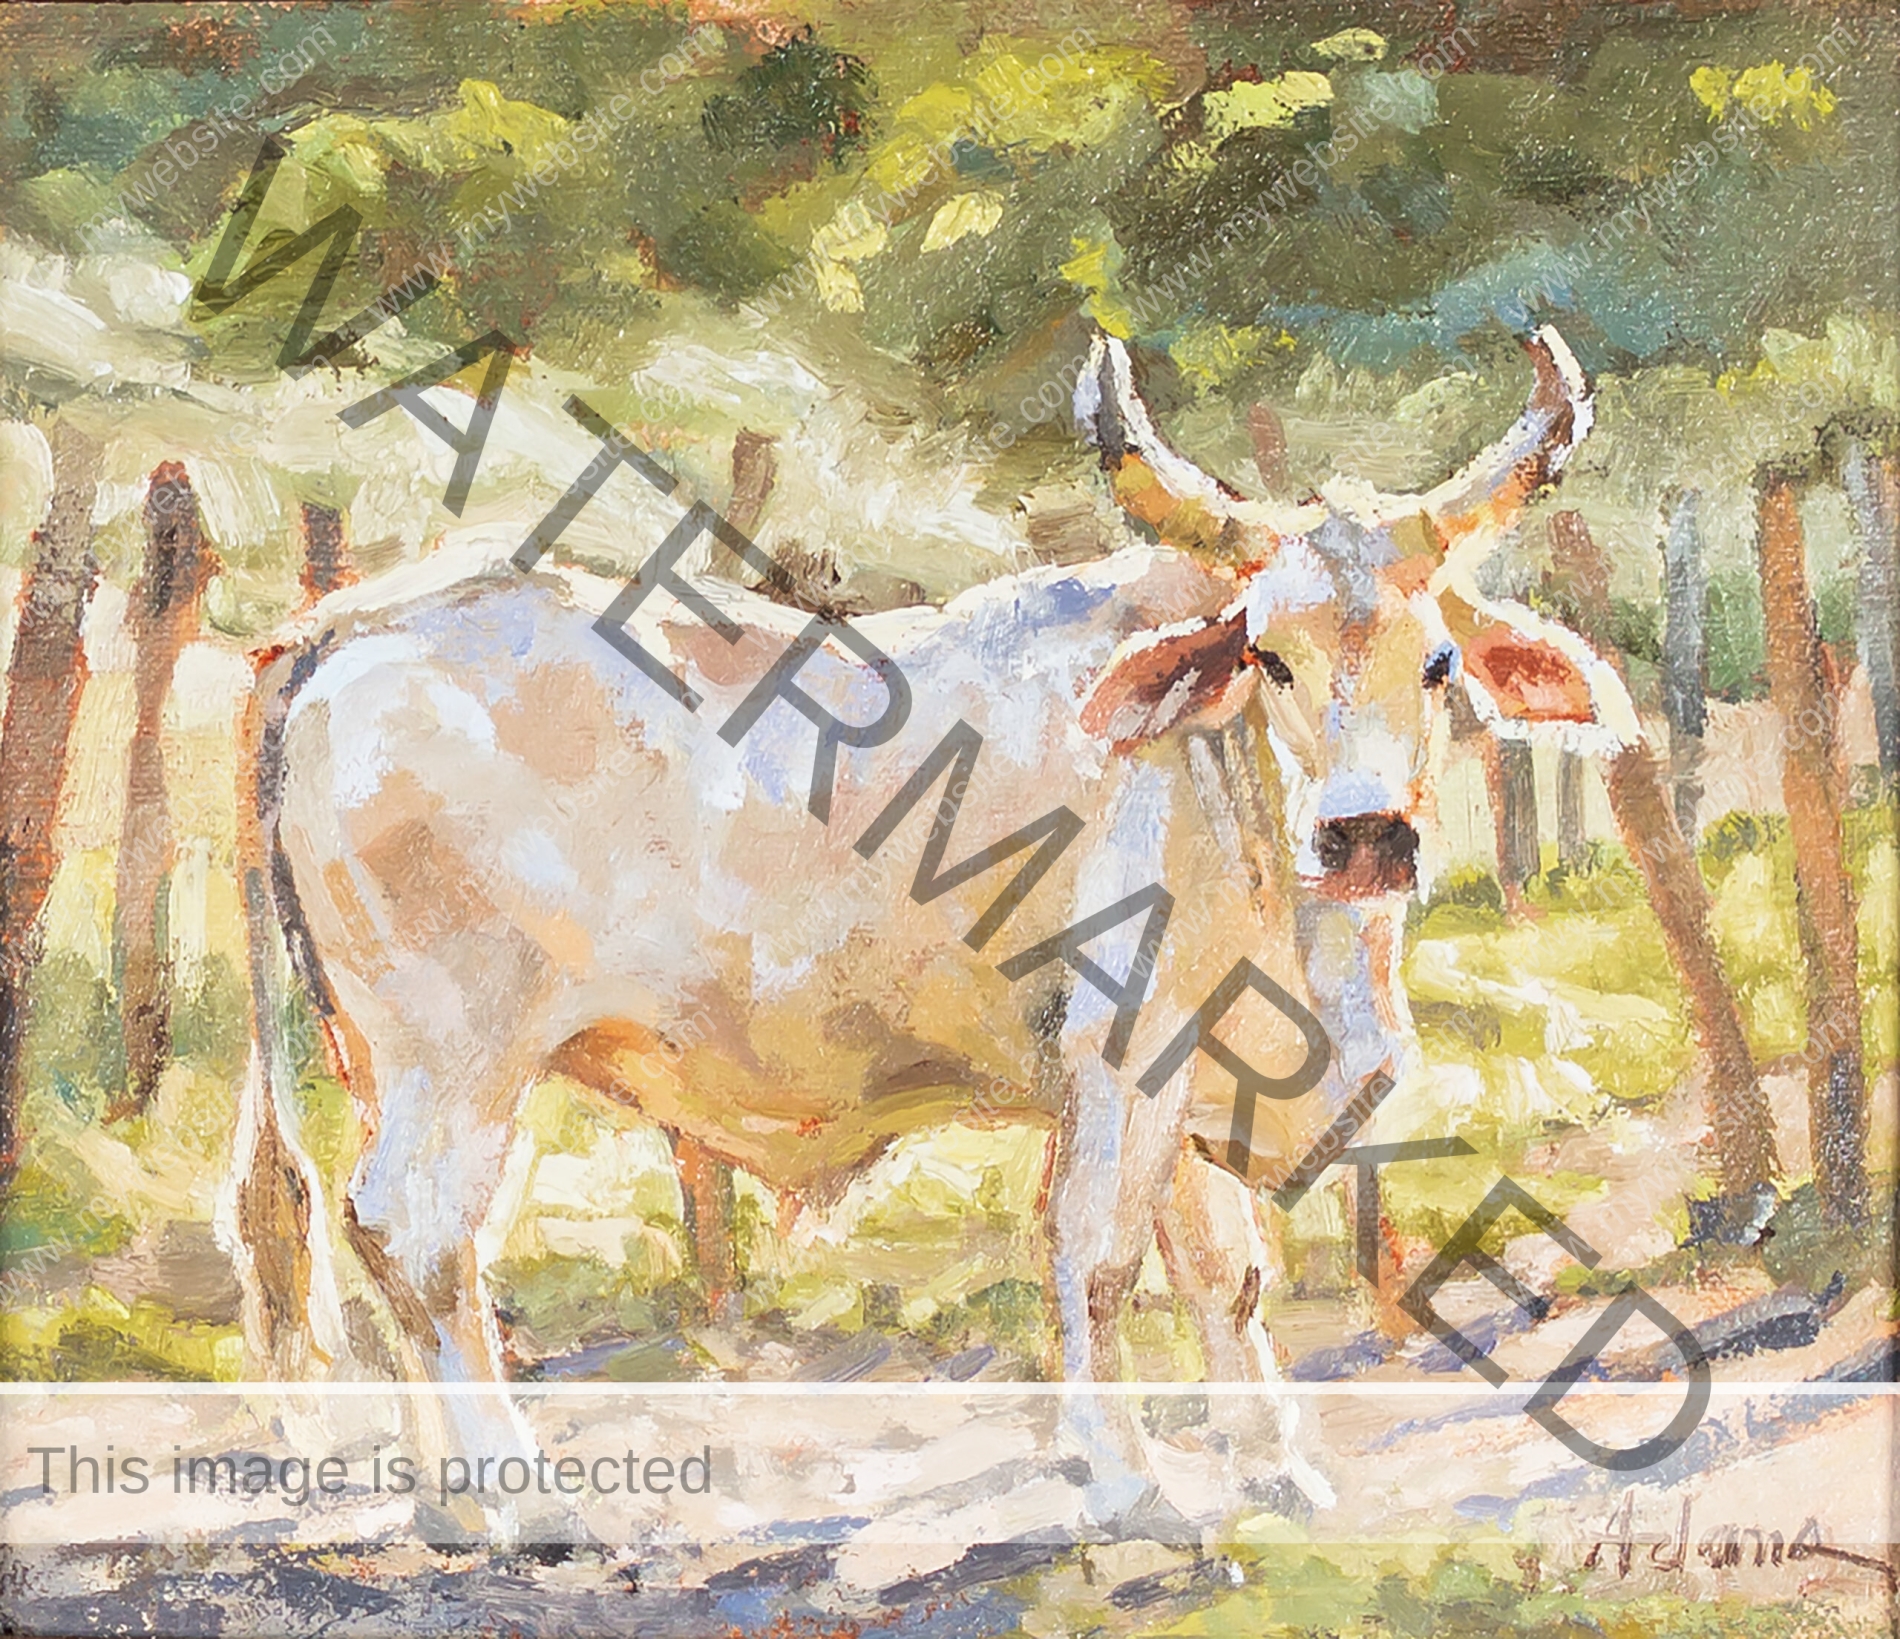 Costa Rican cow oil painting by Susan Adams. It's an impressionist portrayal of a cow that stares out of the canvas, evoking a sense of serenity and warmth.